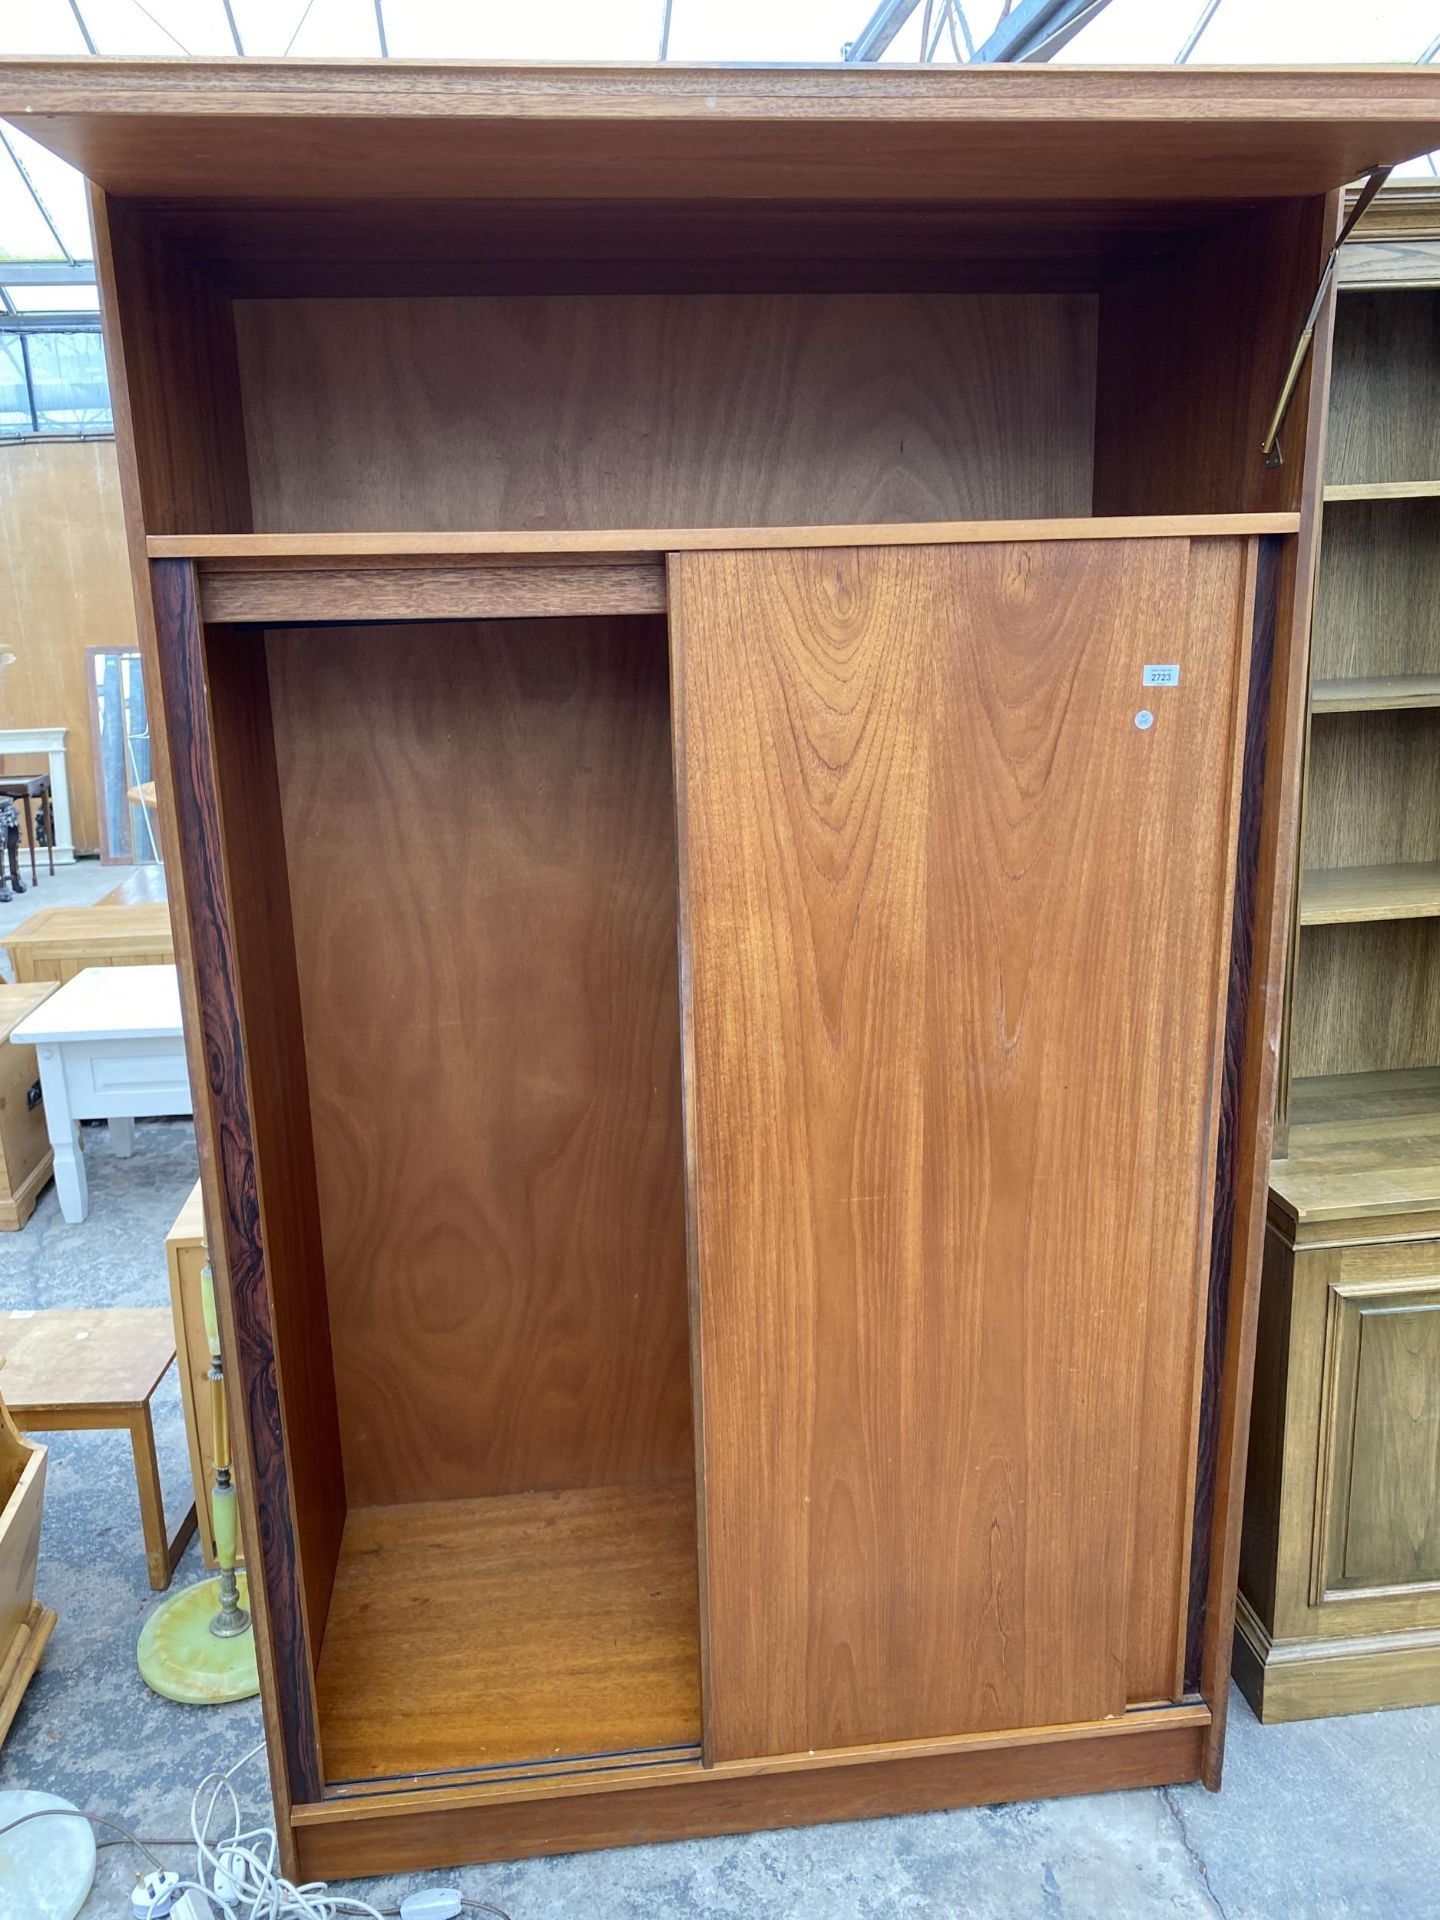 A RETRO TEAK AUSTINSUITE SLIDING TWO DOOR WARDROBE WITH TOP STORAGE SECTION, 48" WIDE, ON CASTERS - Image 3 of 5